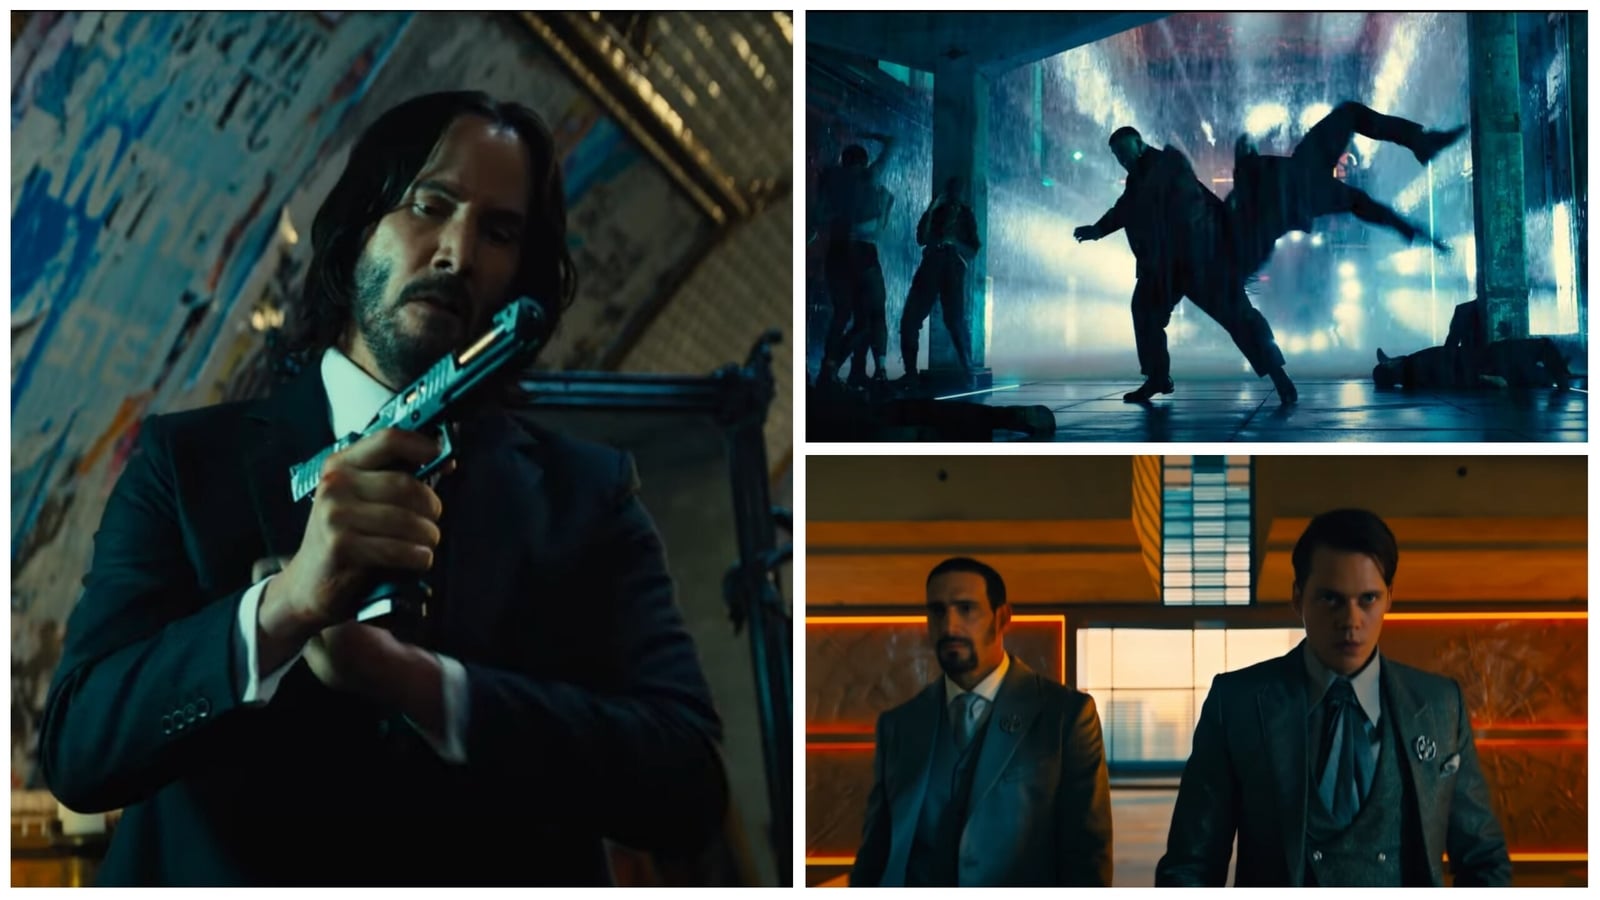 John Wick 4 trailer: Keanu Reeves must duel to death for his